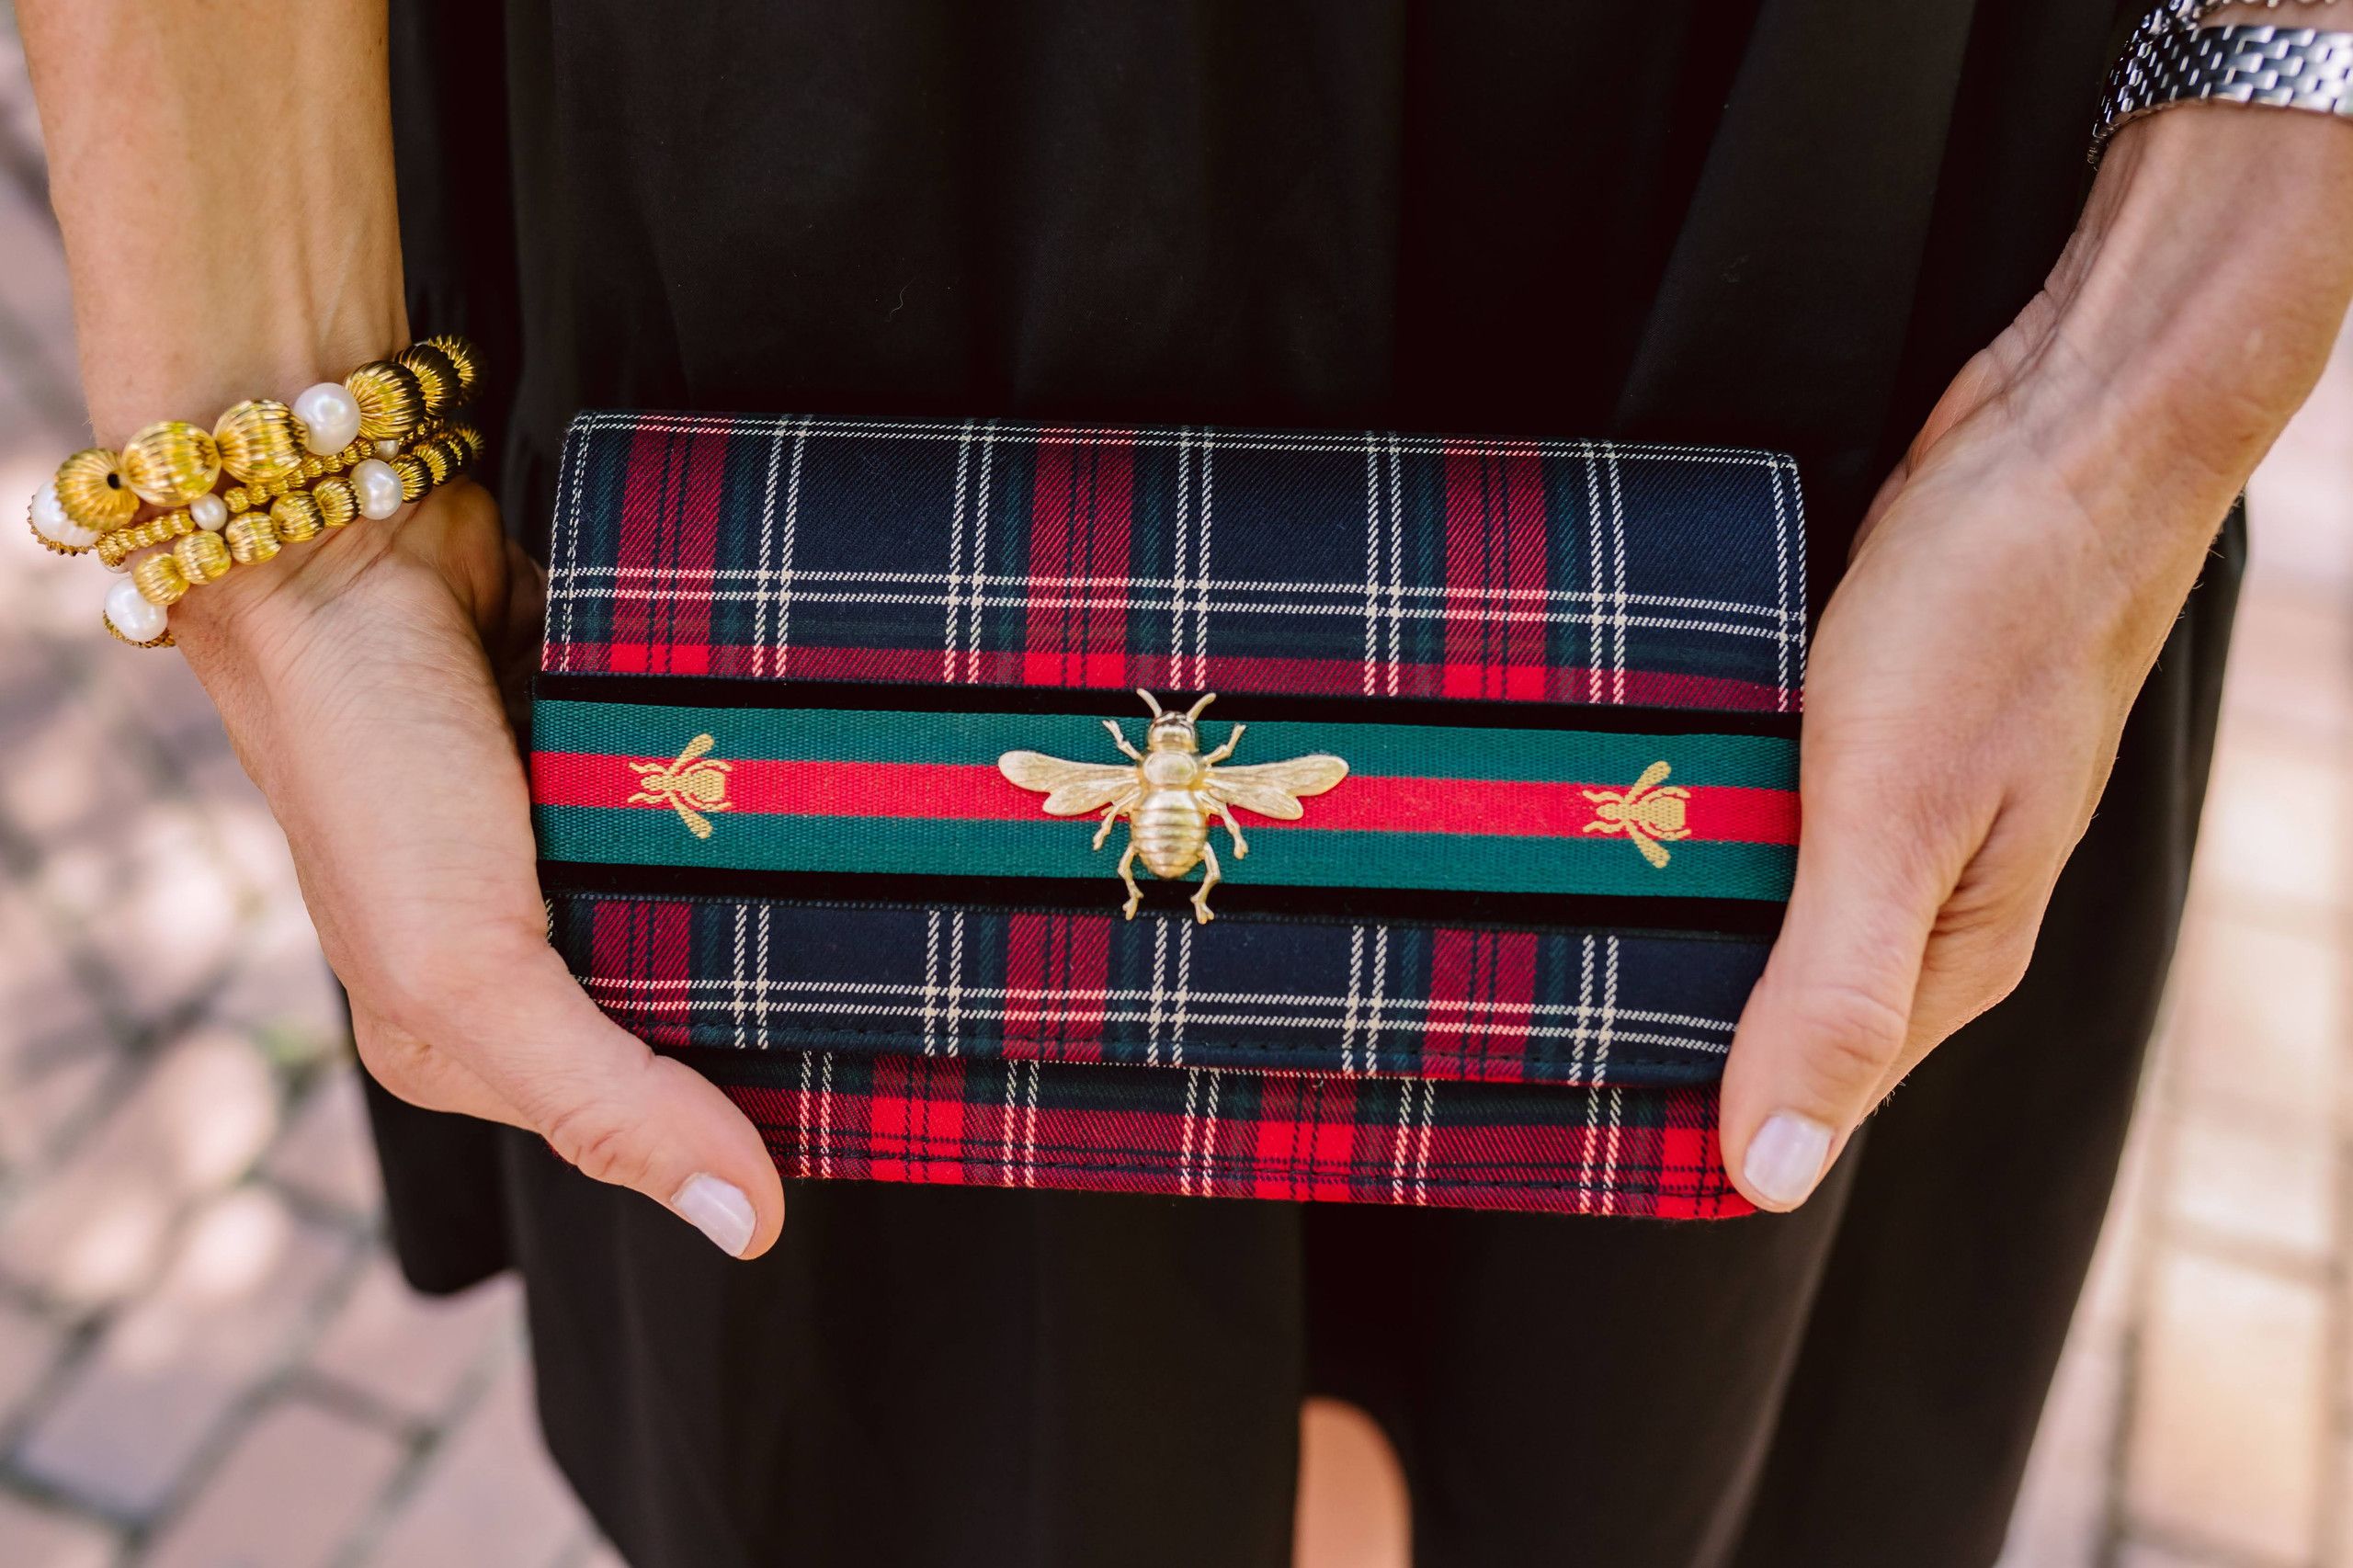 Ruby Red Plaid Clutch - Bee Stripe with Gold Bee Charm | Lisi Lerch Inc